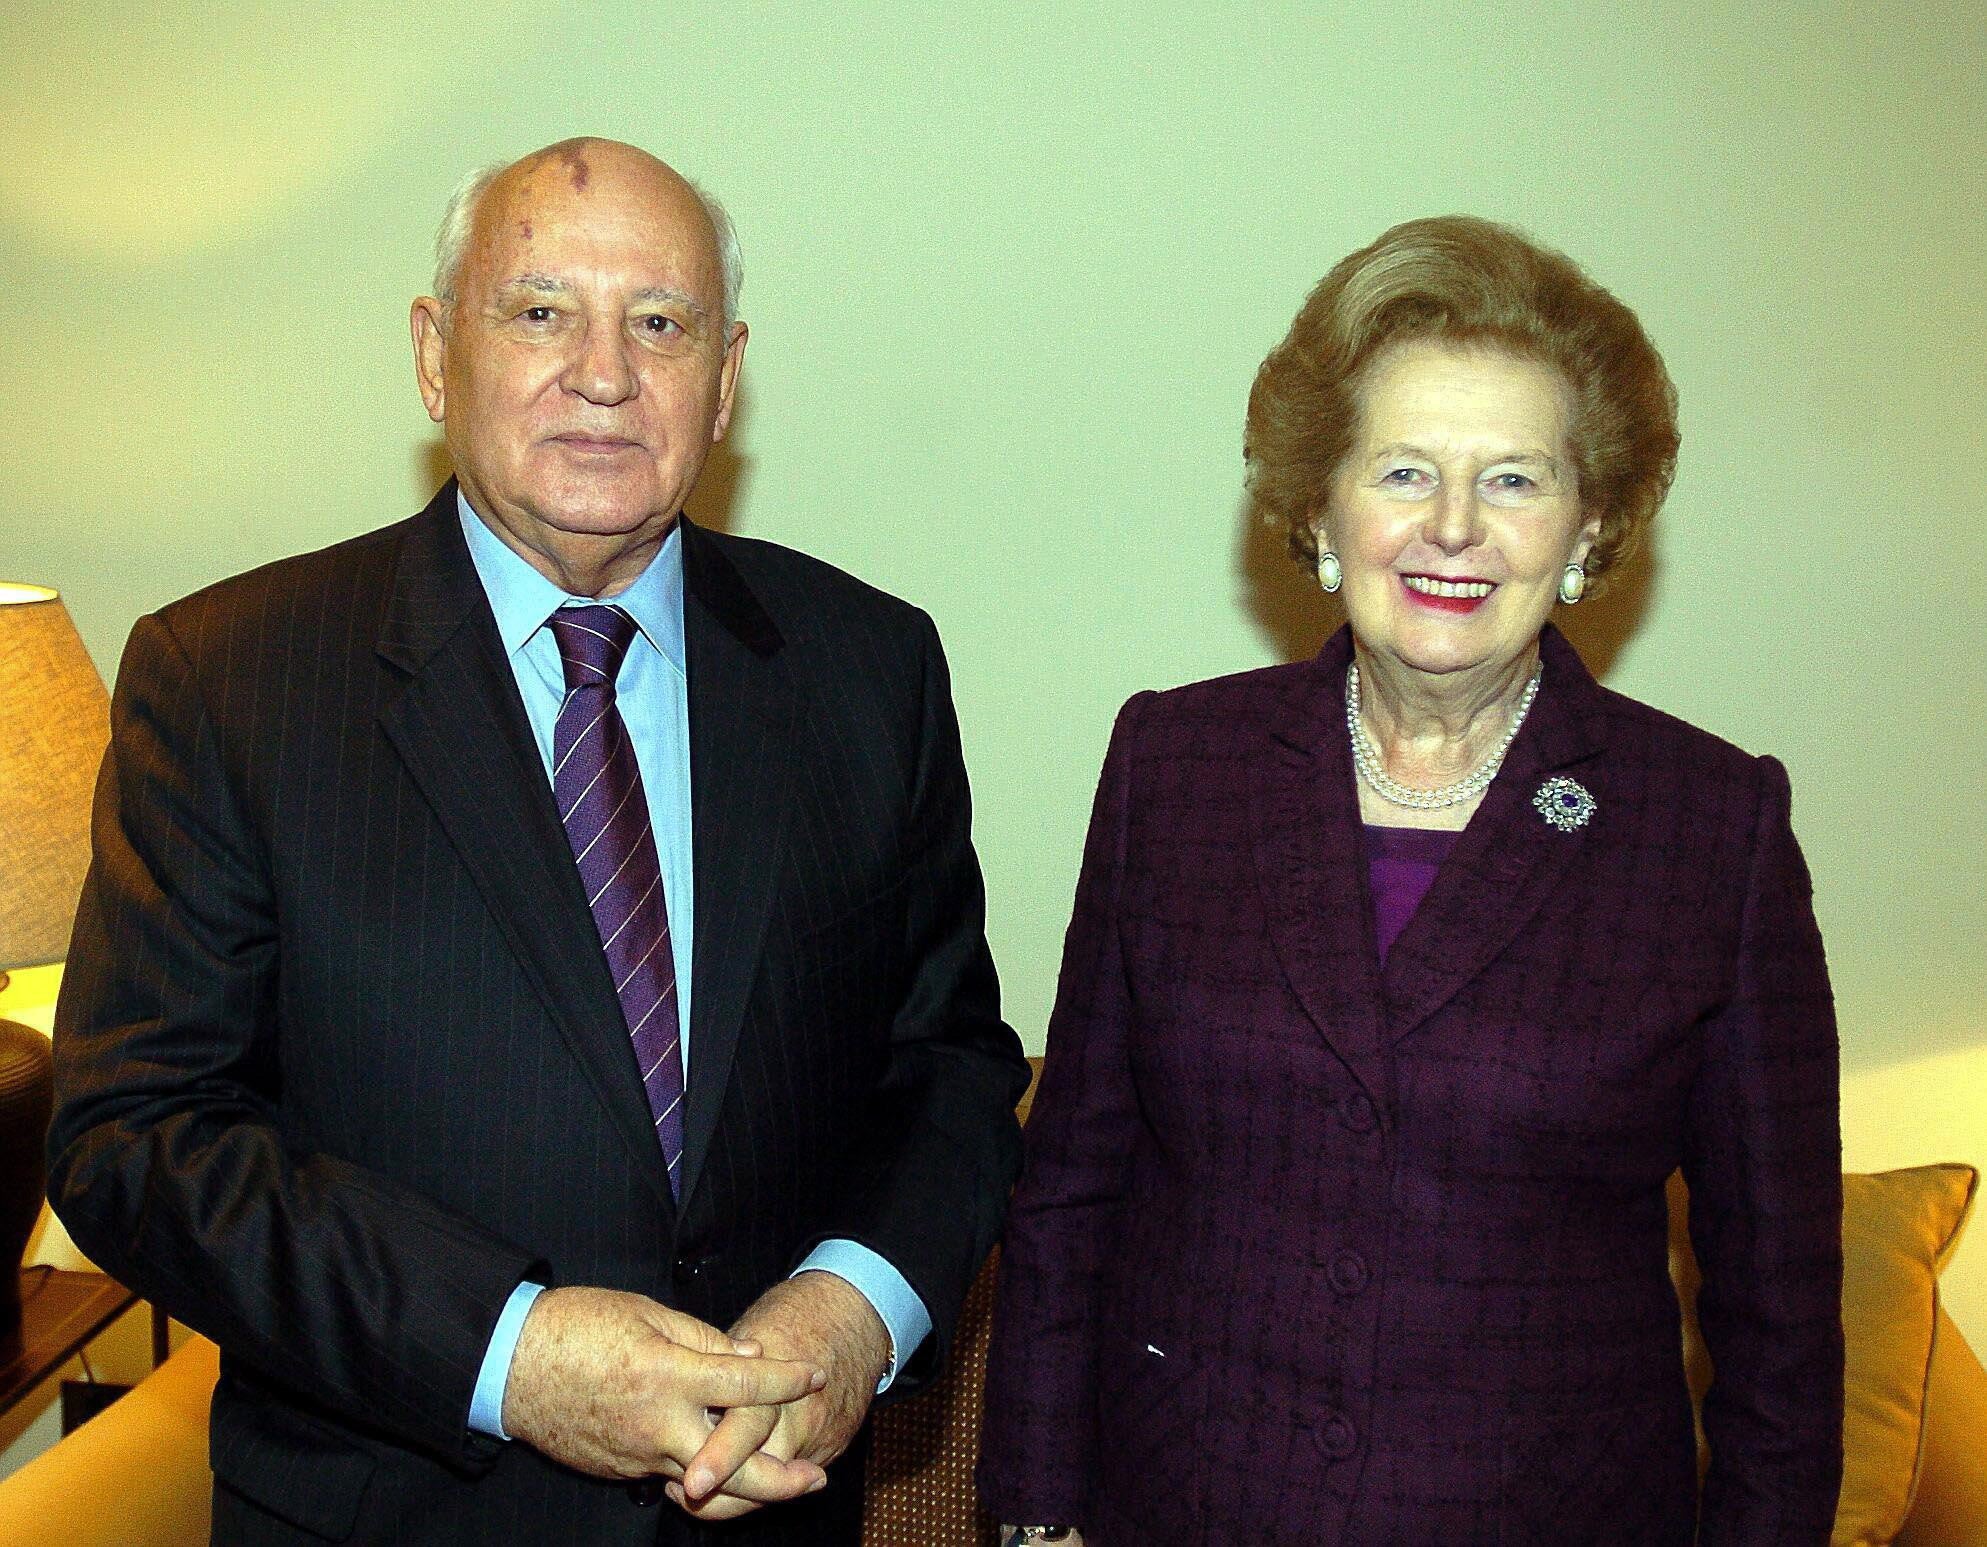 Mikhail Gorbachev stands with Lady Thatcher in 2005